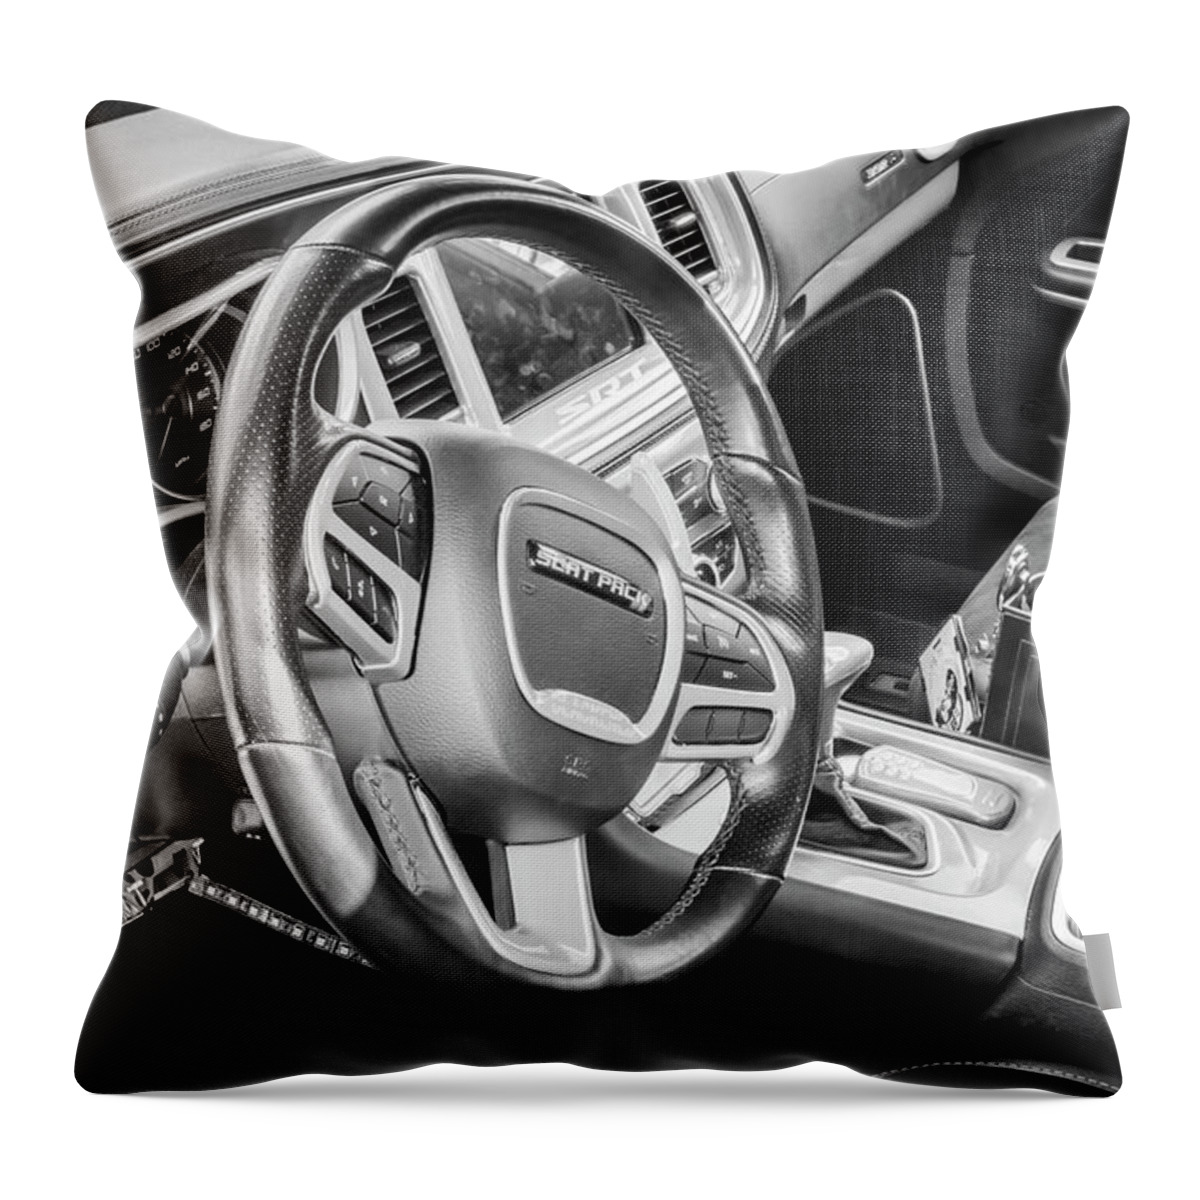 The 2022 Go Mango Orange Dodge Charger Scat Pack Srt 392 Throw Pillow featuring the photograph 2022 Go Mango Orange Dodge Charger Scat Pack SRT 392 X103 by Rich Franco